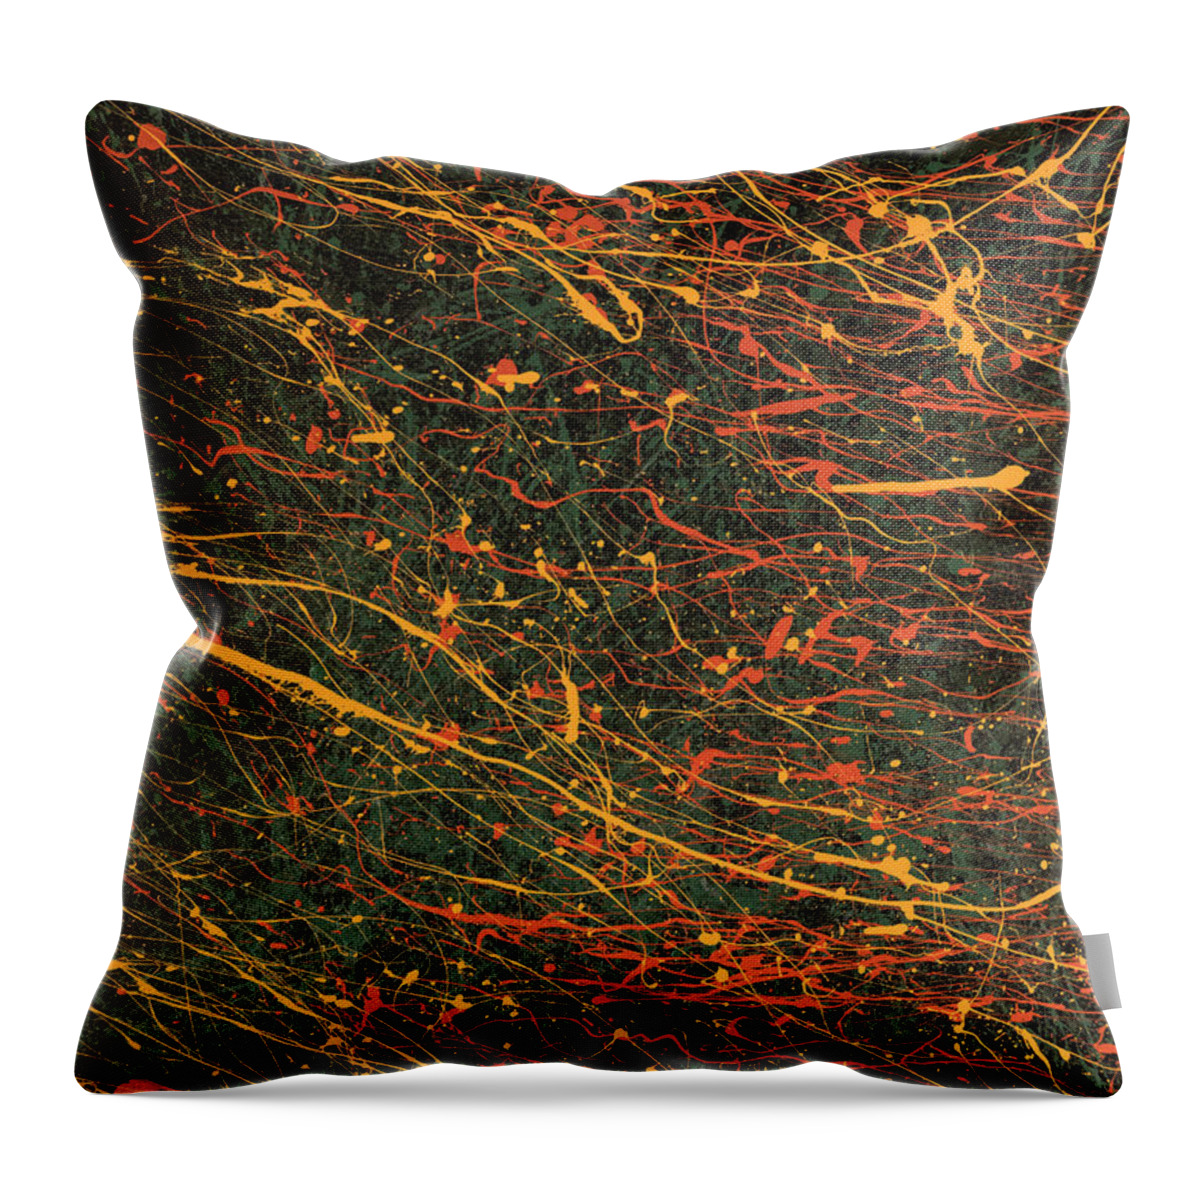 Abstract Throw Pillow featuring the painting Immersion by Heather Meglasson Impact Artist